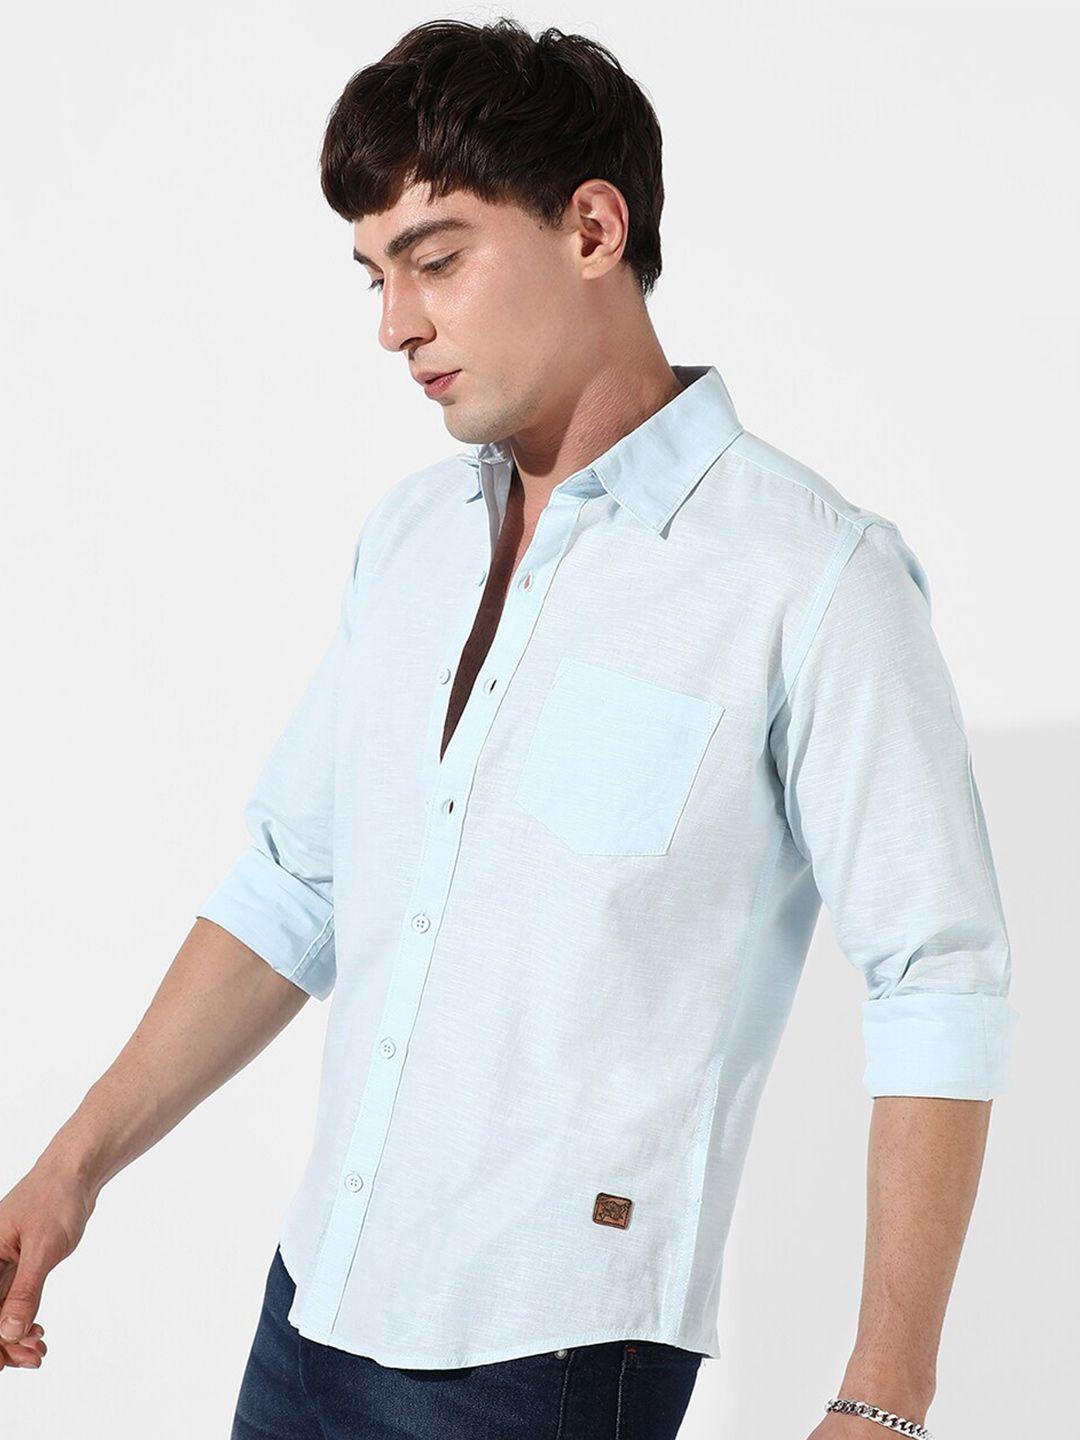 campus sutra blue classic fit cotton casual shirt